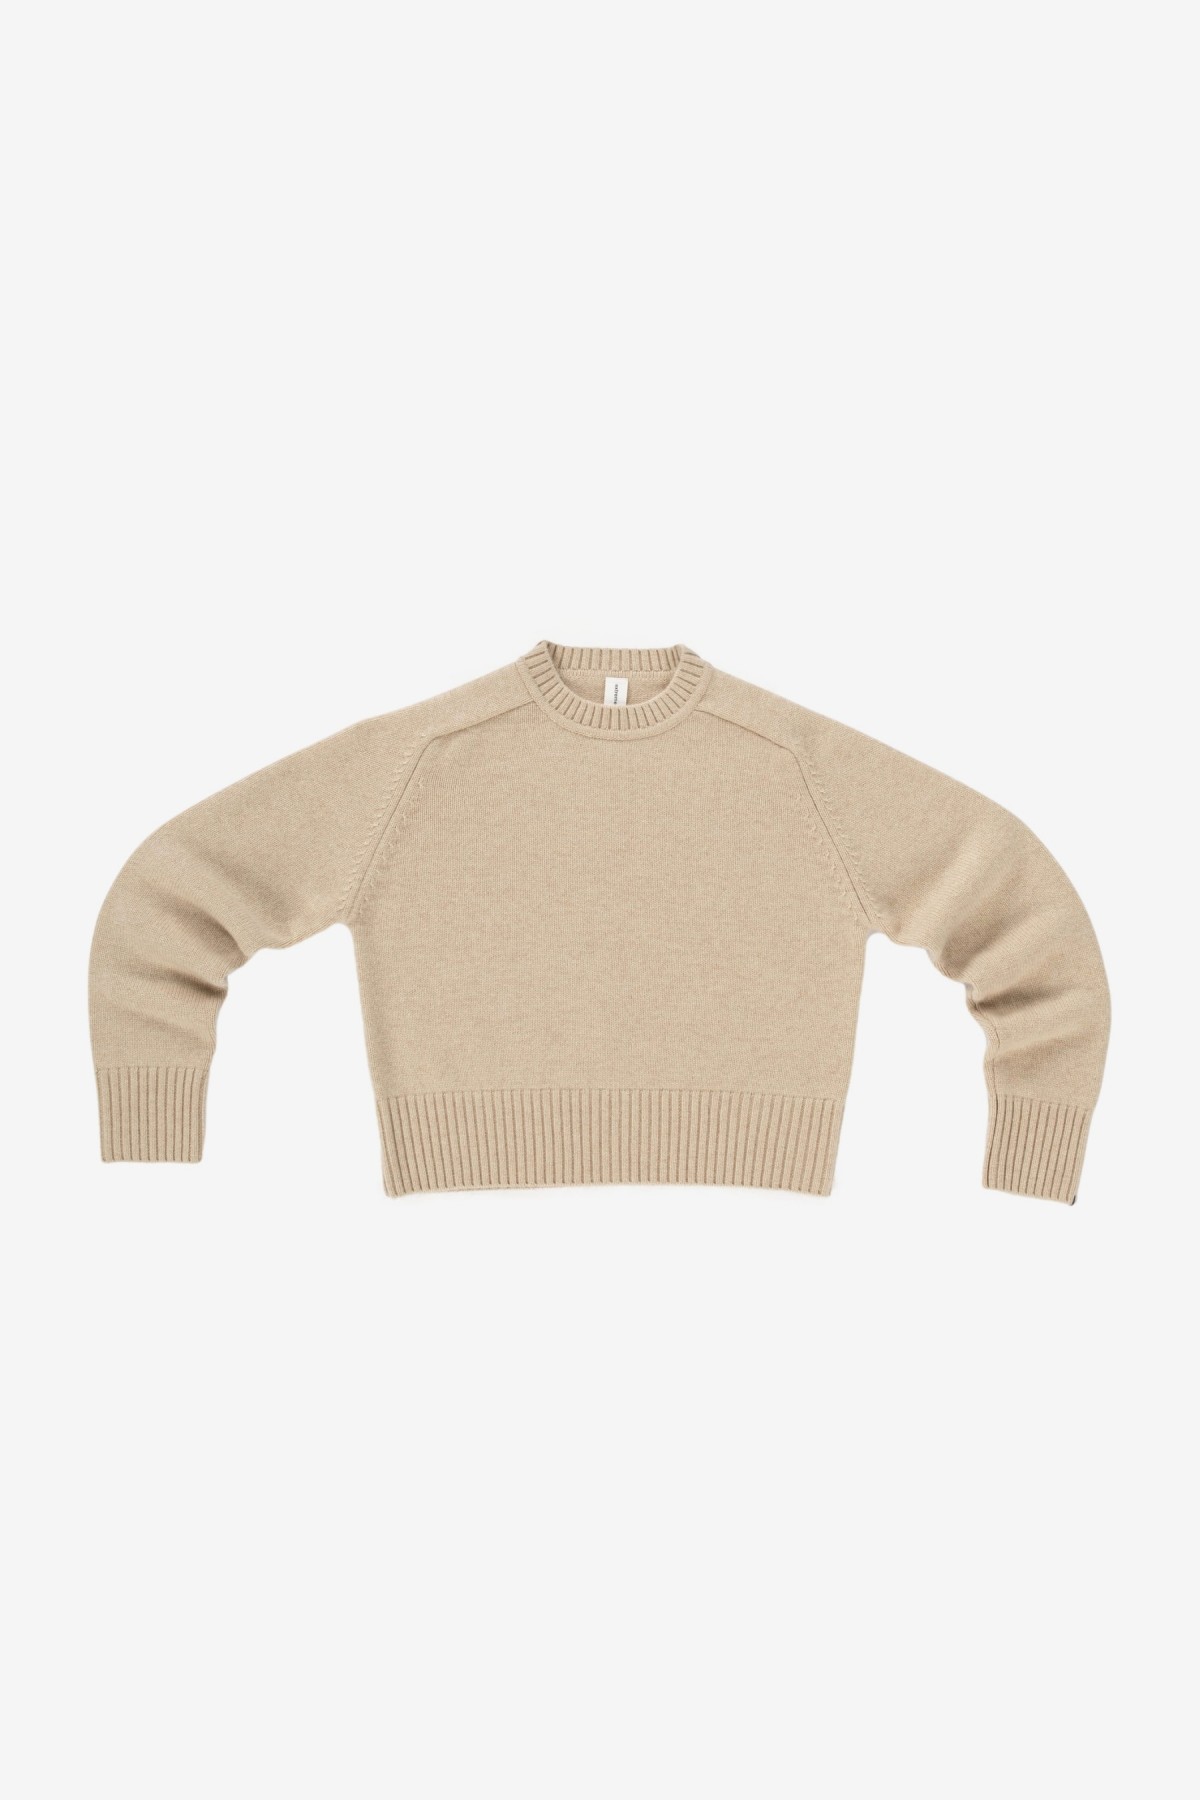 extreme cashmere n°167 please in Latte